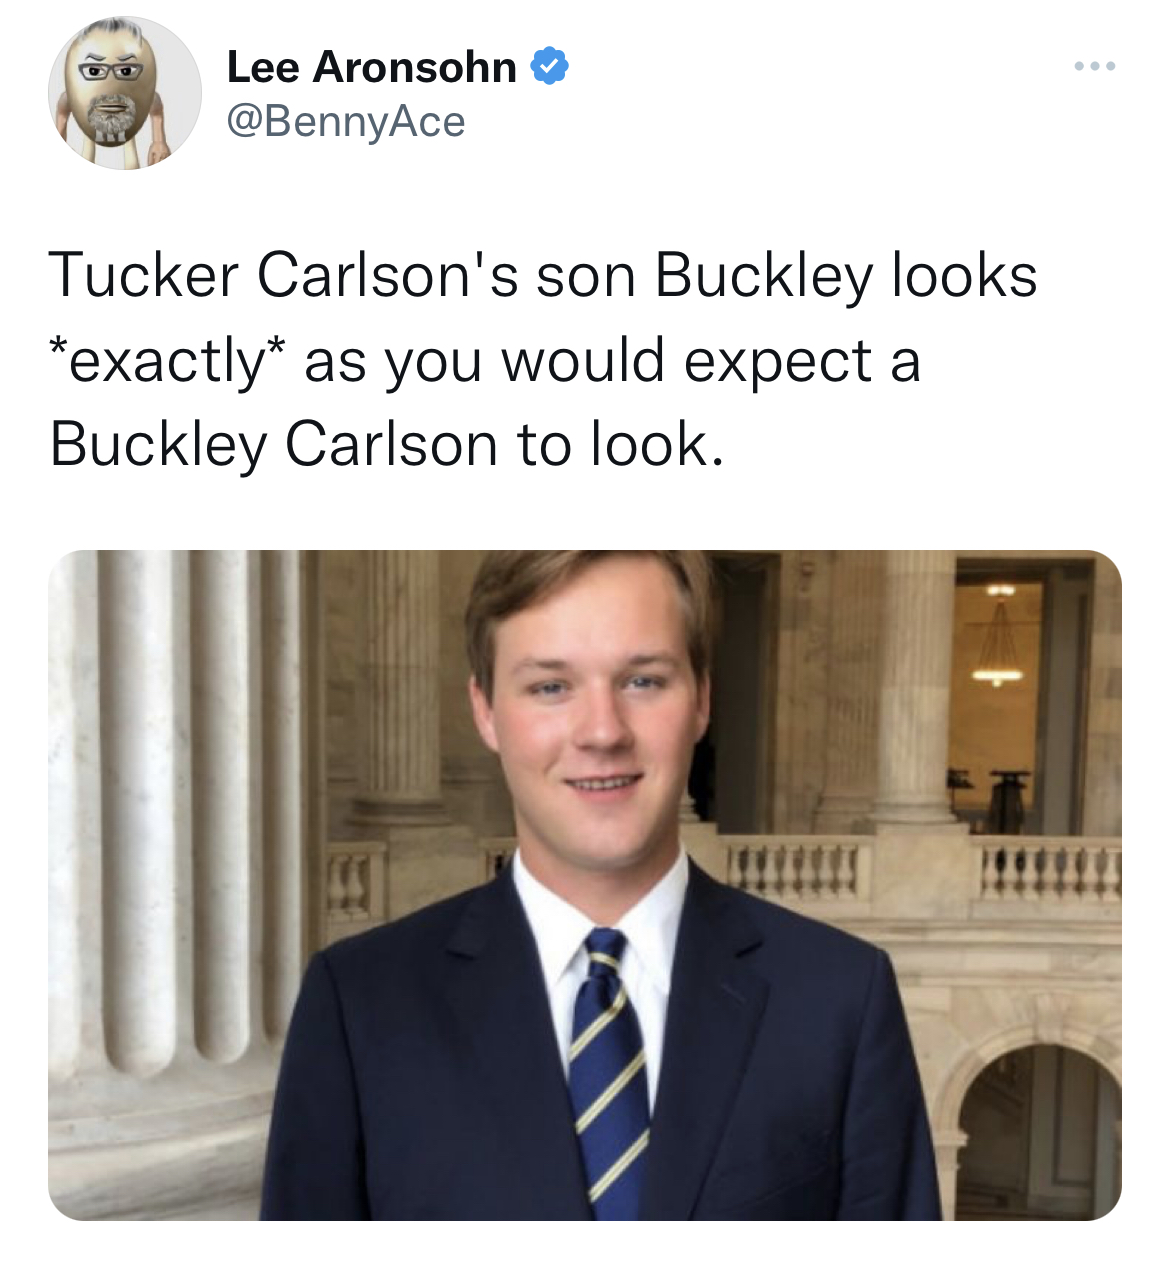 Tweets dunking on celebs - buckley carlson age - Lee Aronsohn Tucker Carlson's son Buckley looks exactly as you would expect a Buckley Carlson to look.